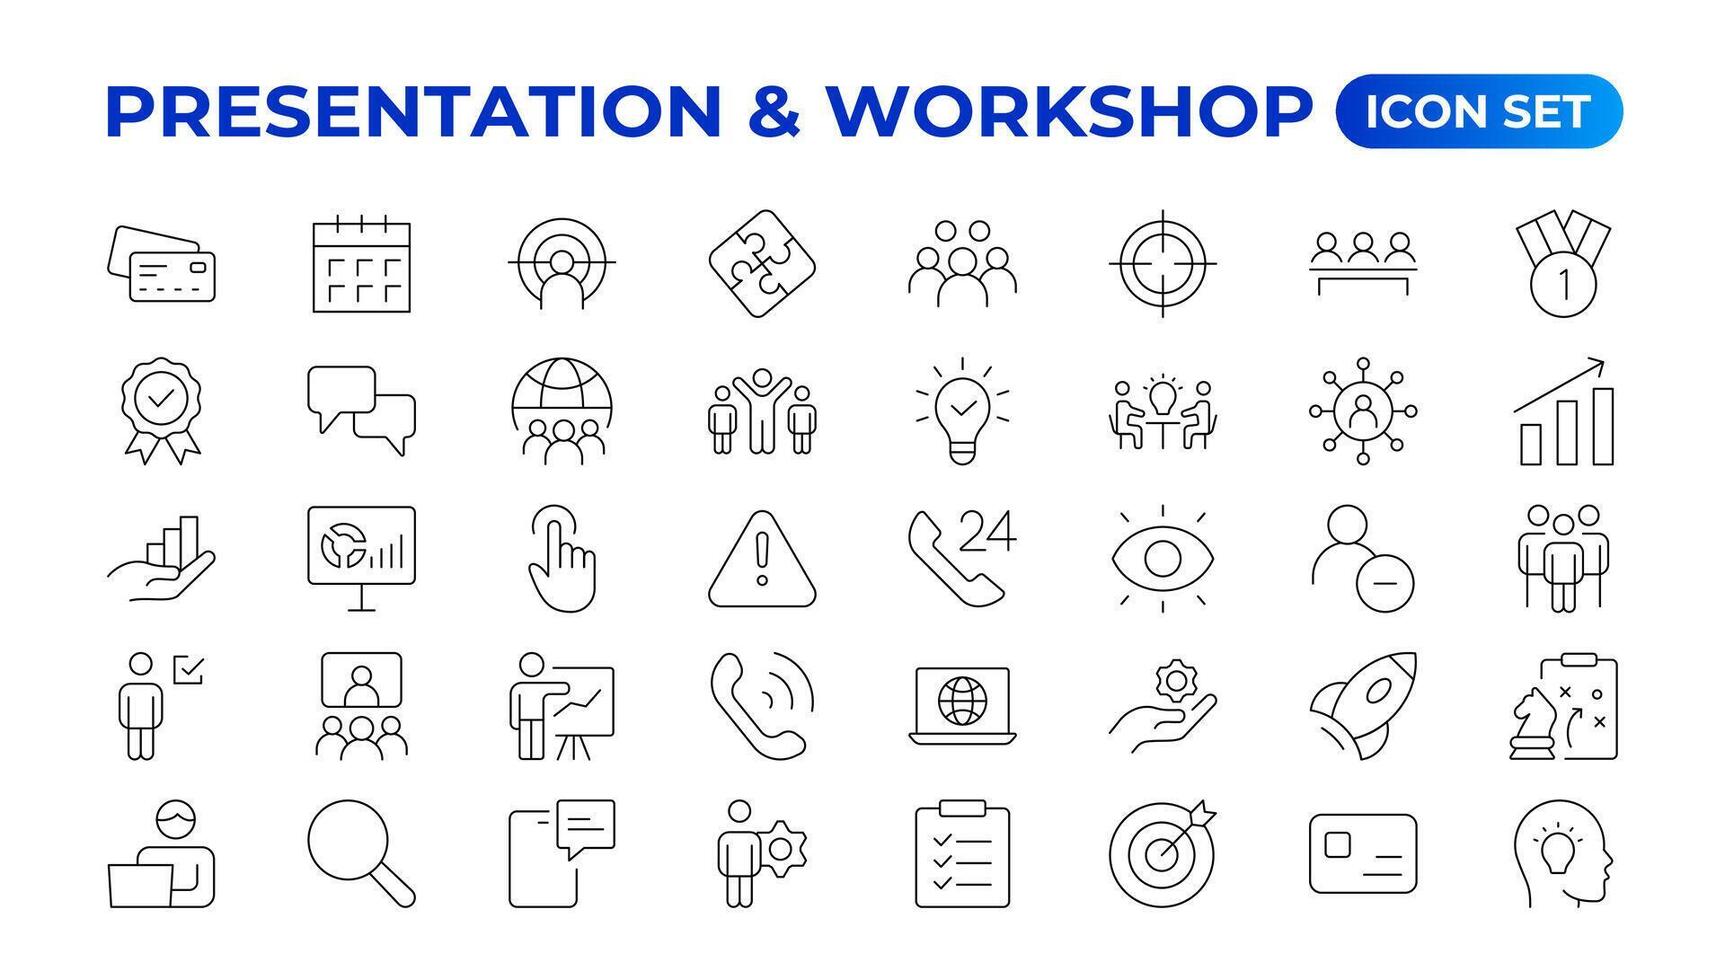 Workshop icon set. Containing team building, collaboration, teamwork, coaching, problem-solving and education icons.Business presentation line icons Presentation, business, seminar, partnership, goals vector